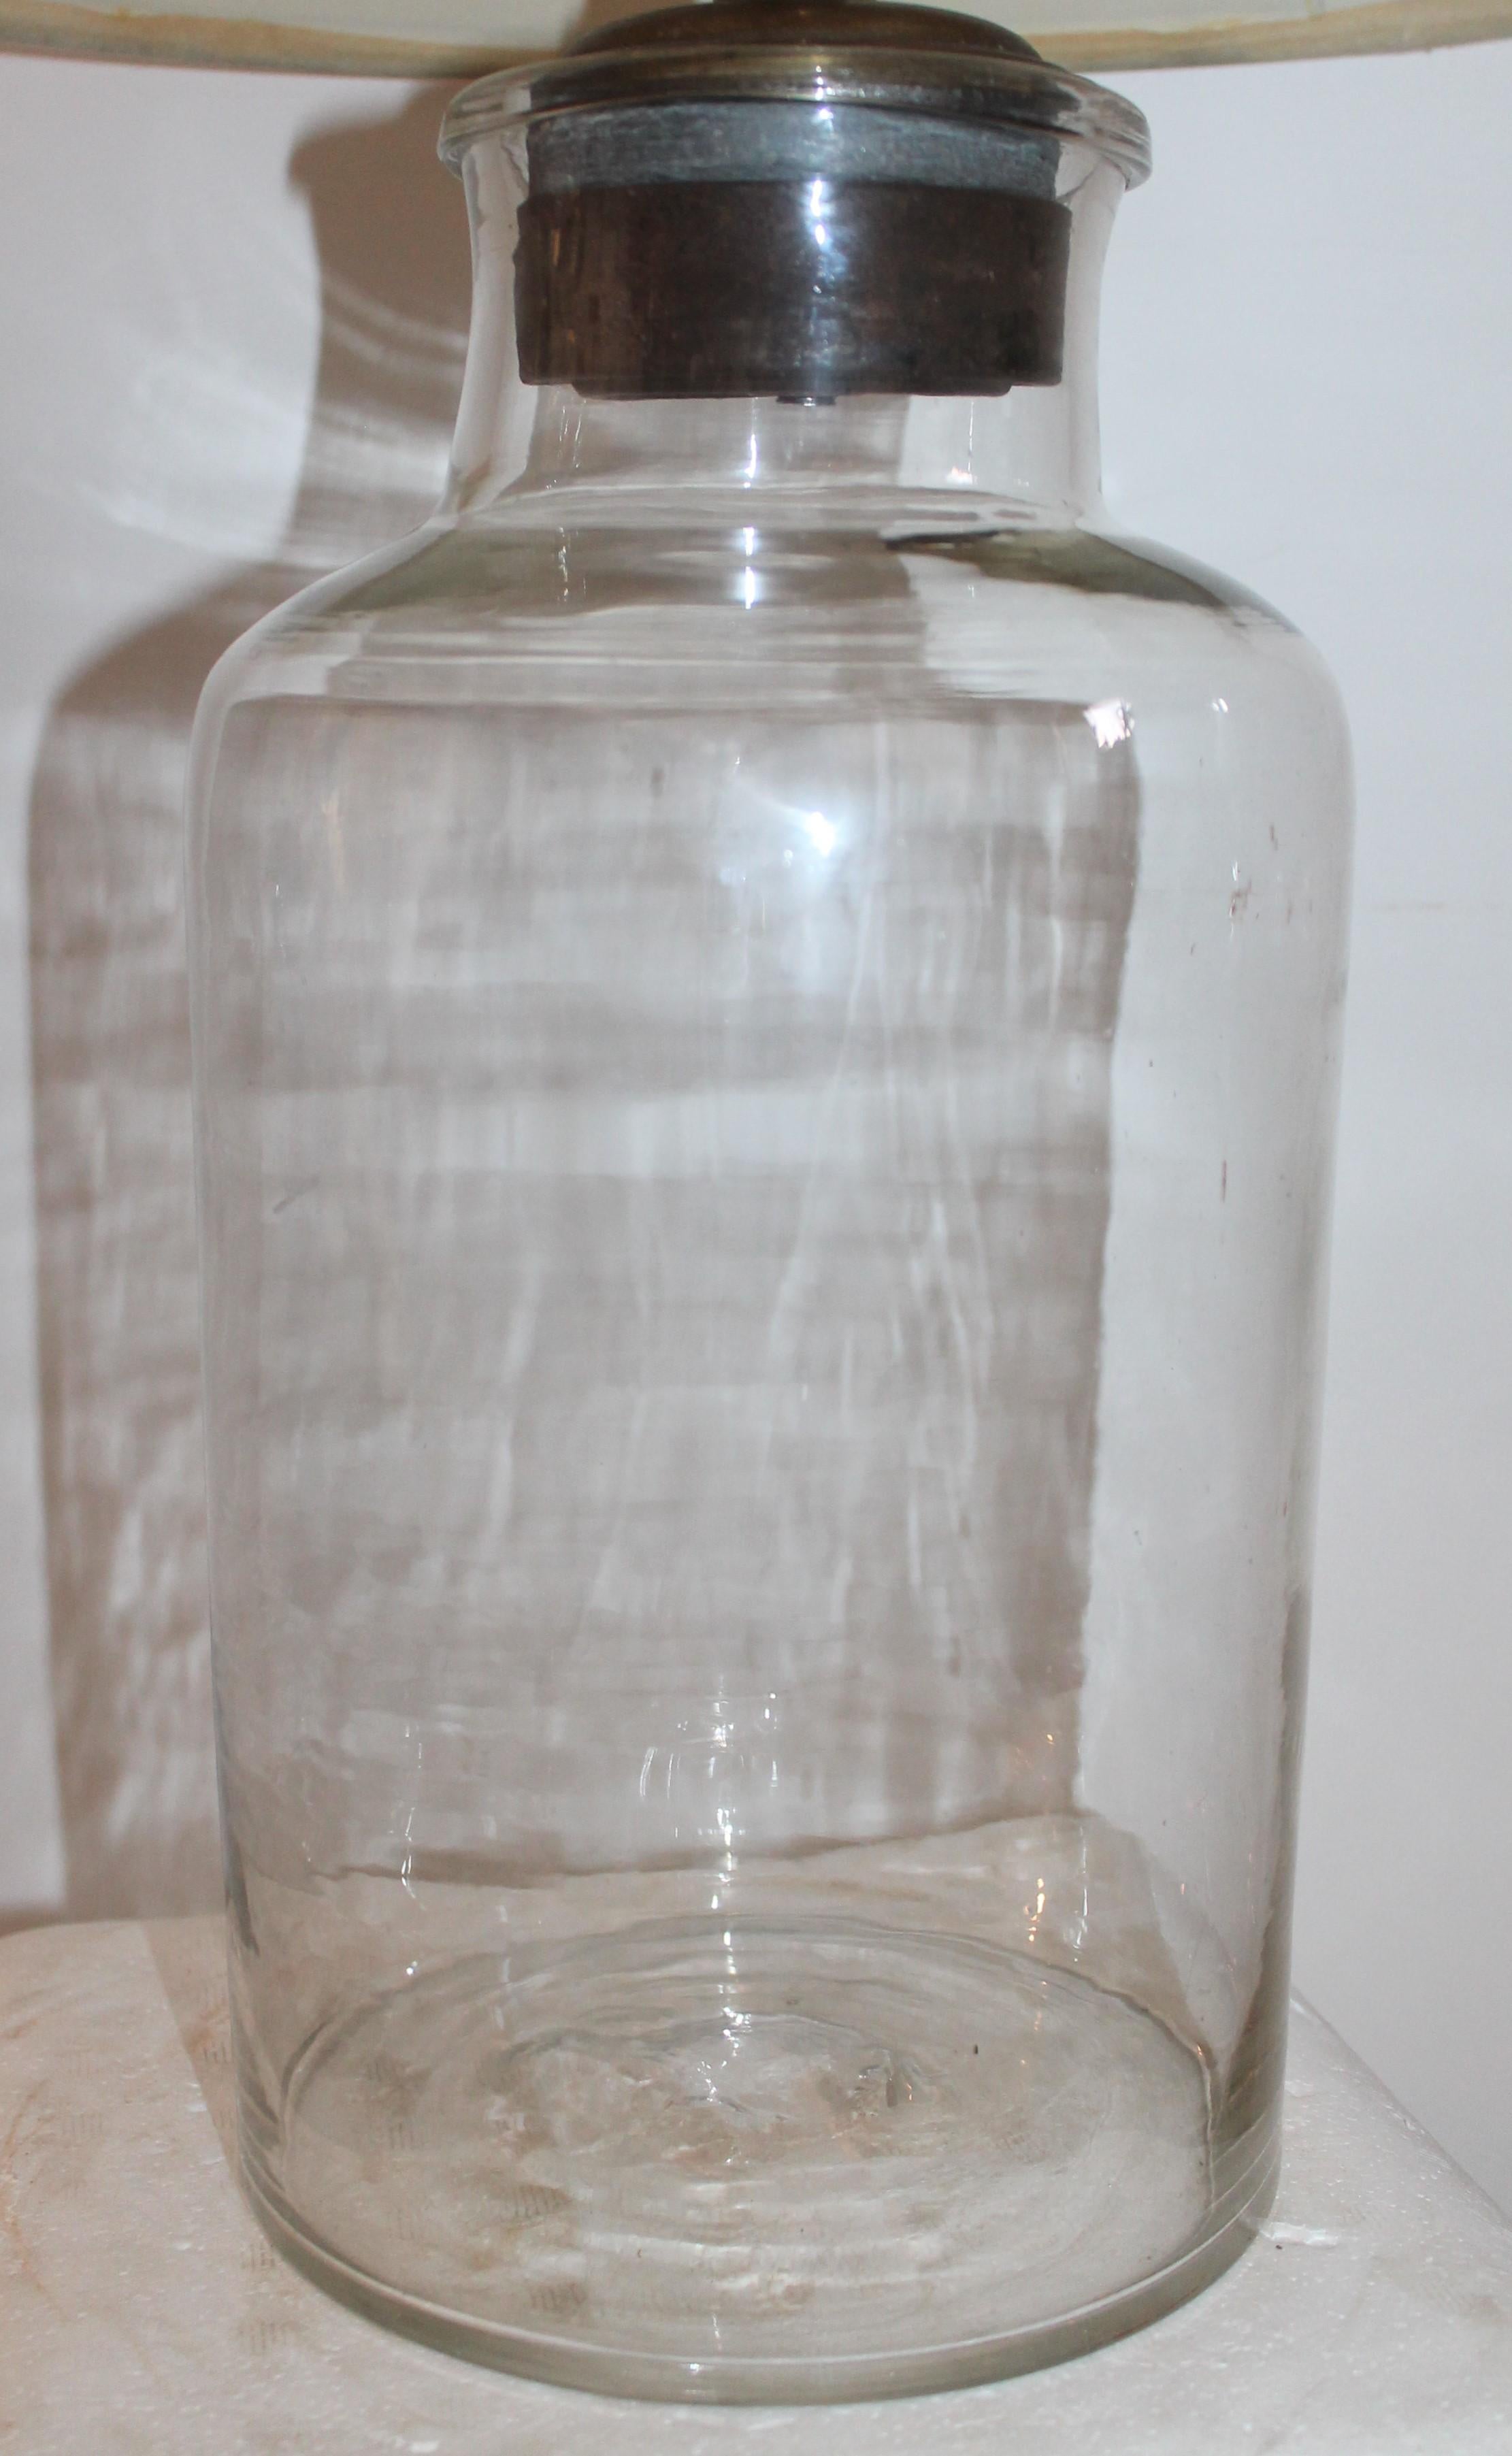 This is a hand blown glass storage jar from New England and is in fine condition. This lamp is newly electric wiring and the lid comes off for showcase your own private collection of shells, balls,toys or what ever you want to put in this jar. Such